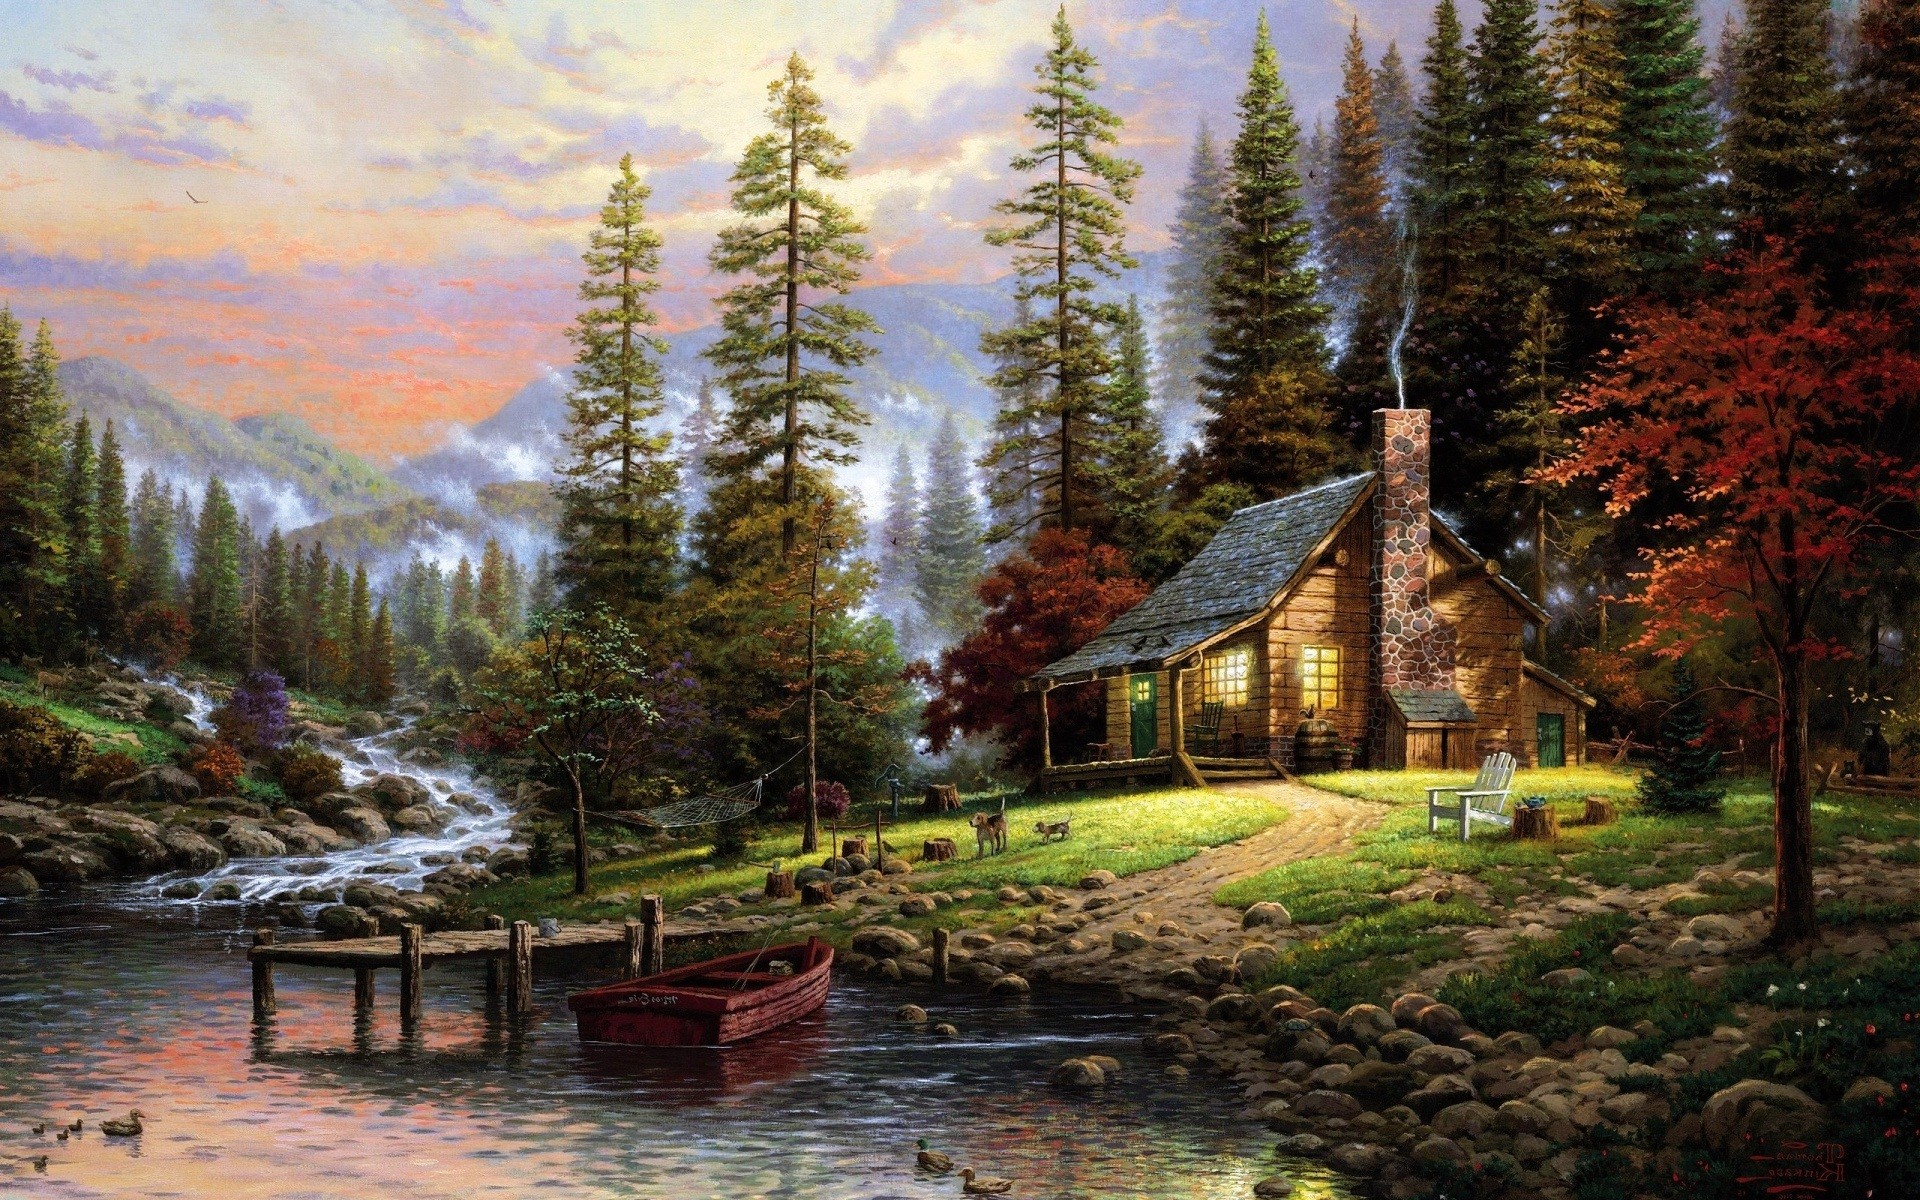 1920x1200 September 3, 2015 By Stephen Comments Off on Mountain Cabin Wallpapers .